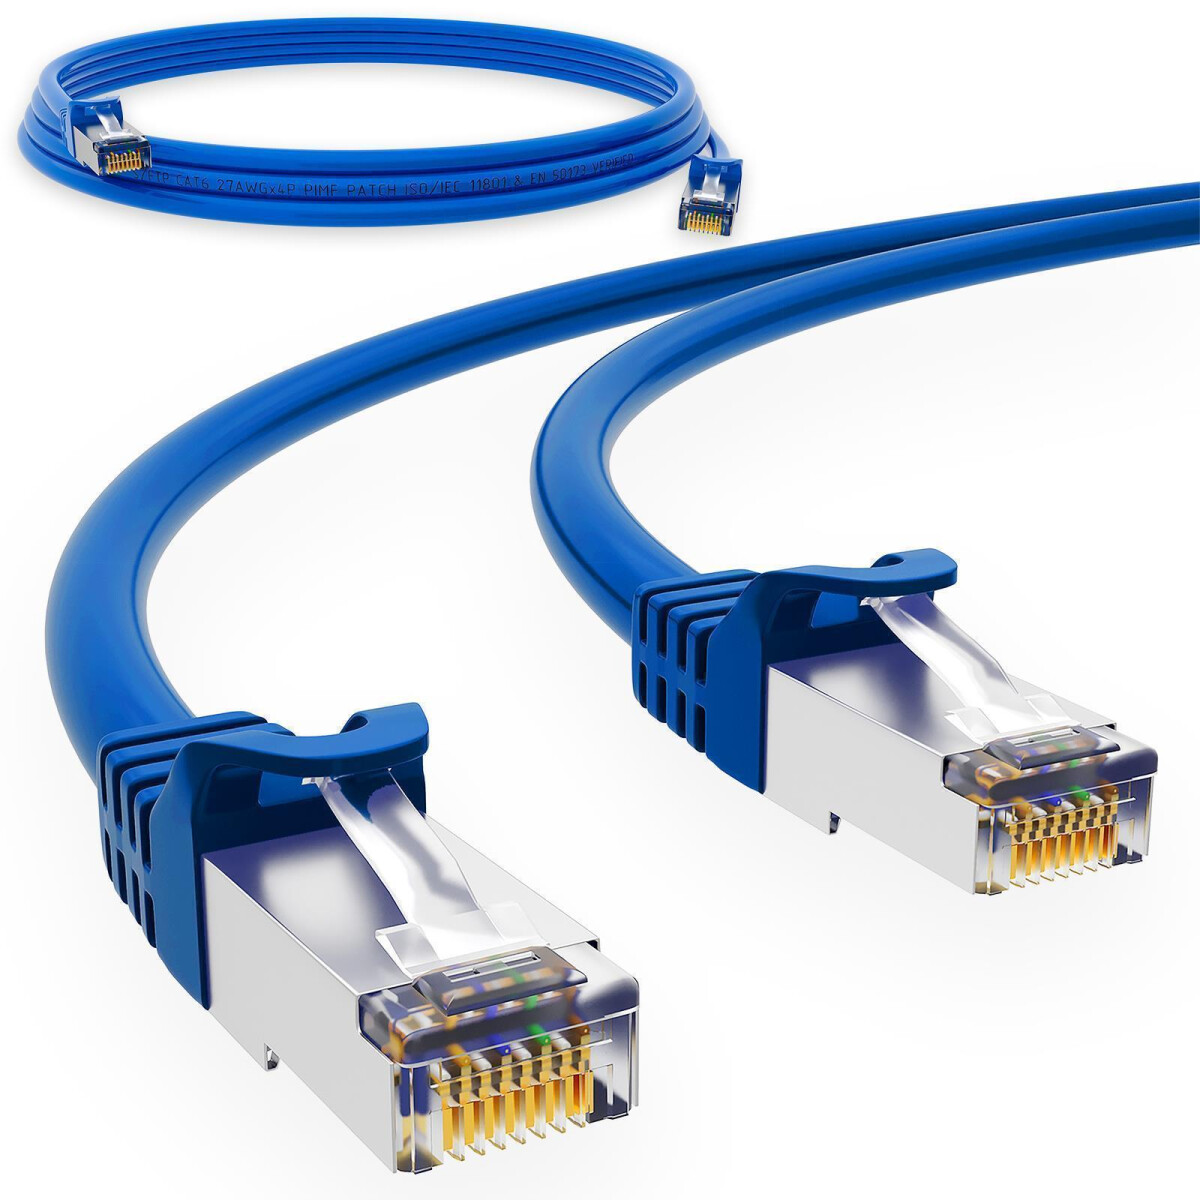 Patch Cable Cat 6 Angle, Patch Cable Cat6 0 5m